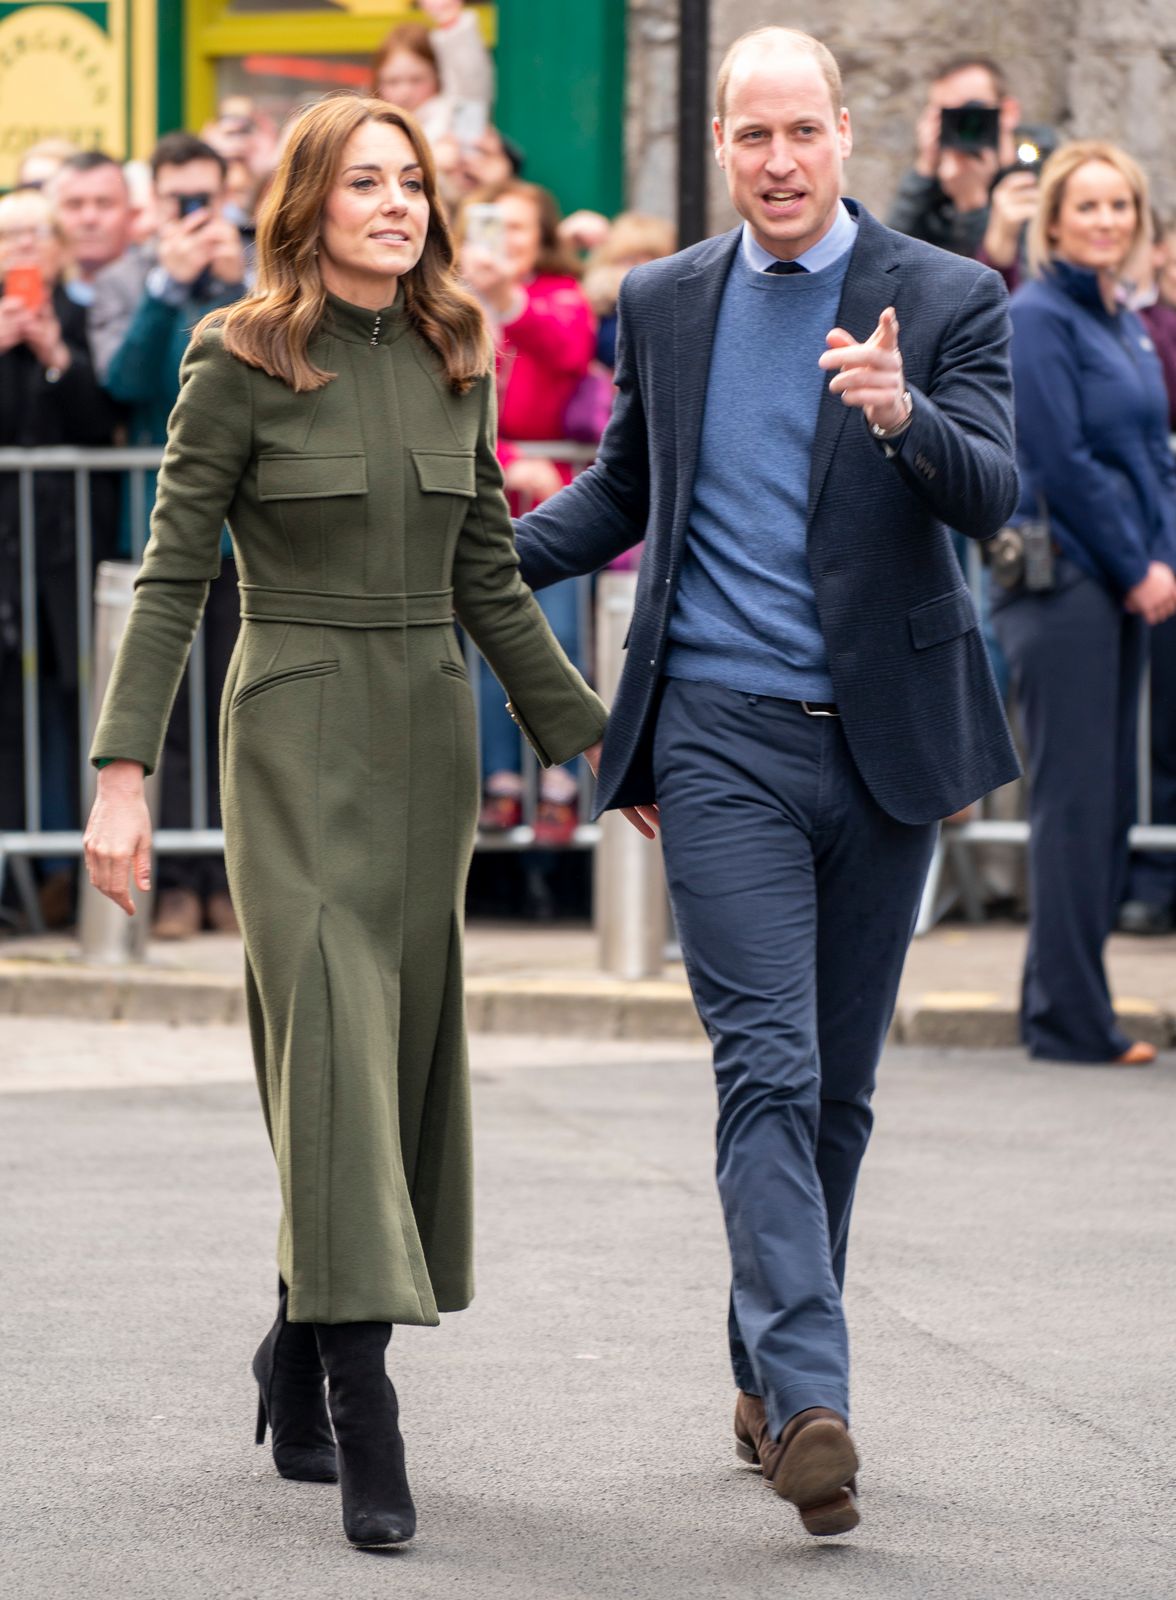 Prince William and Kate Middleton meet members of the public gathered on King Street during day three of their visit to Ireland on March 5, 2020 | Photo: Getty Images